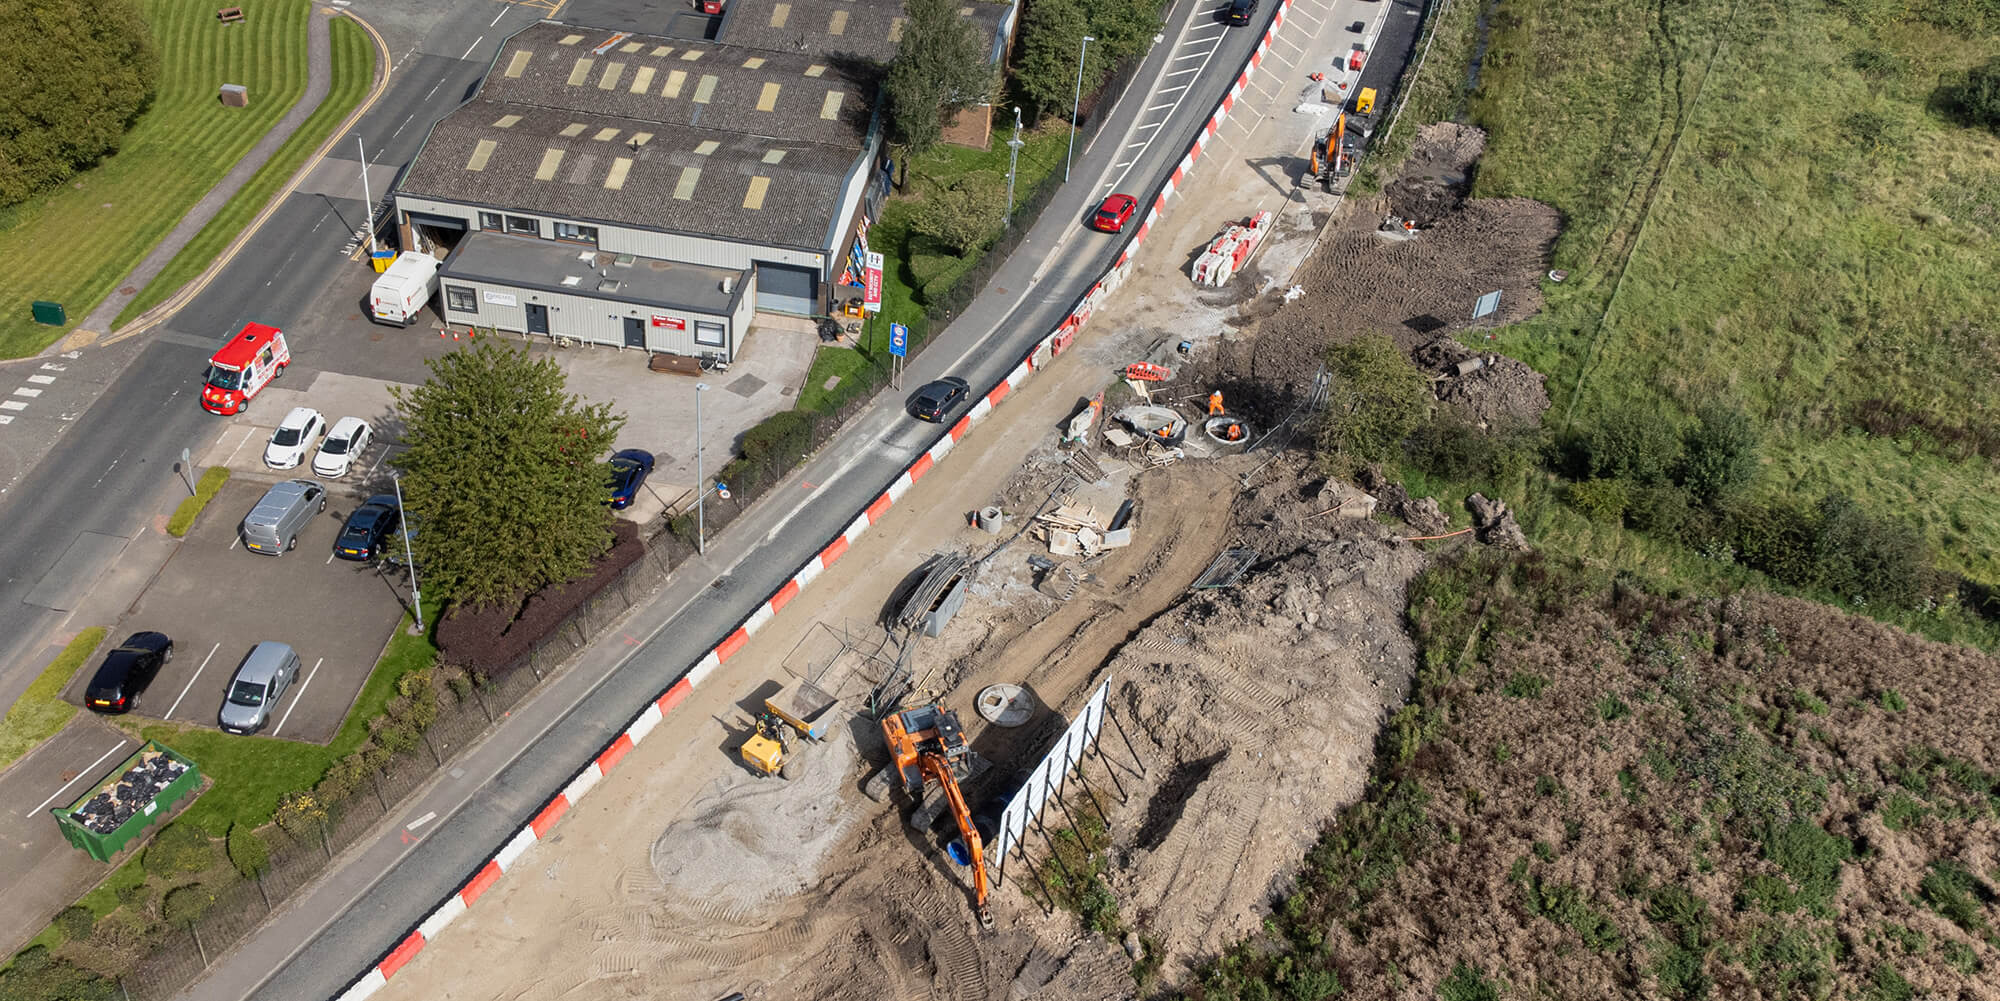 South Heywood Link Road - Phase 2